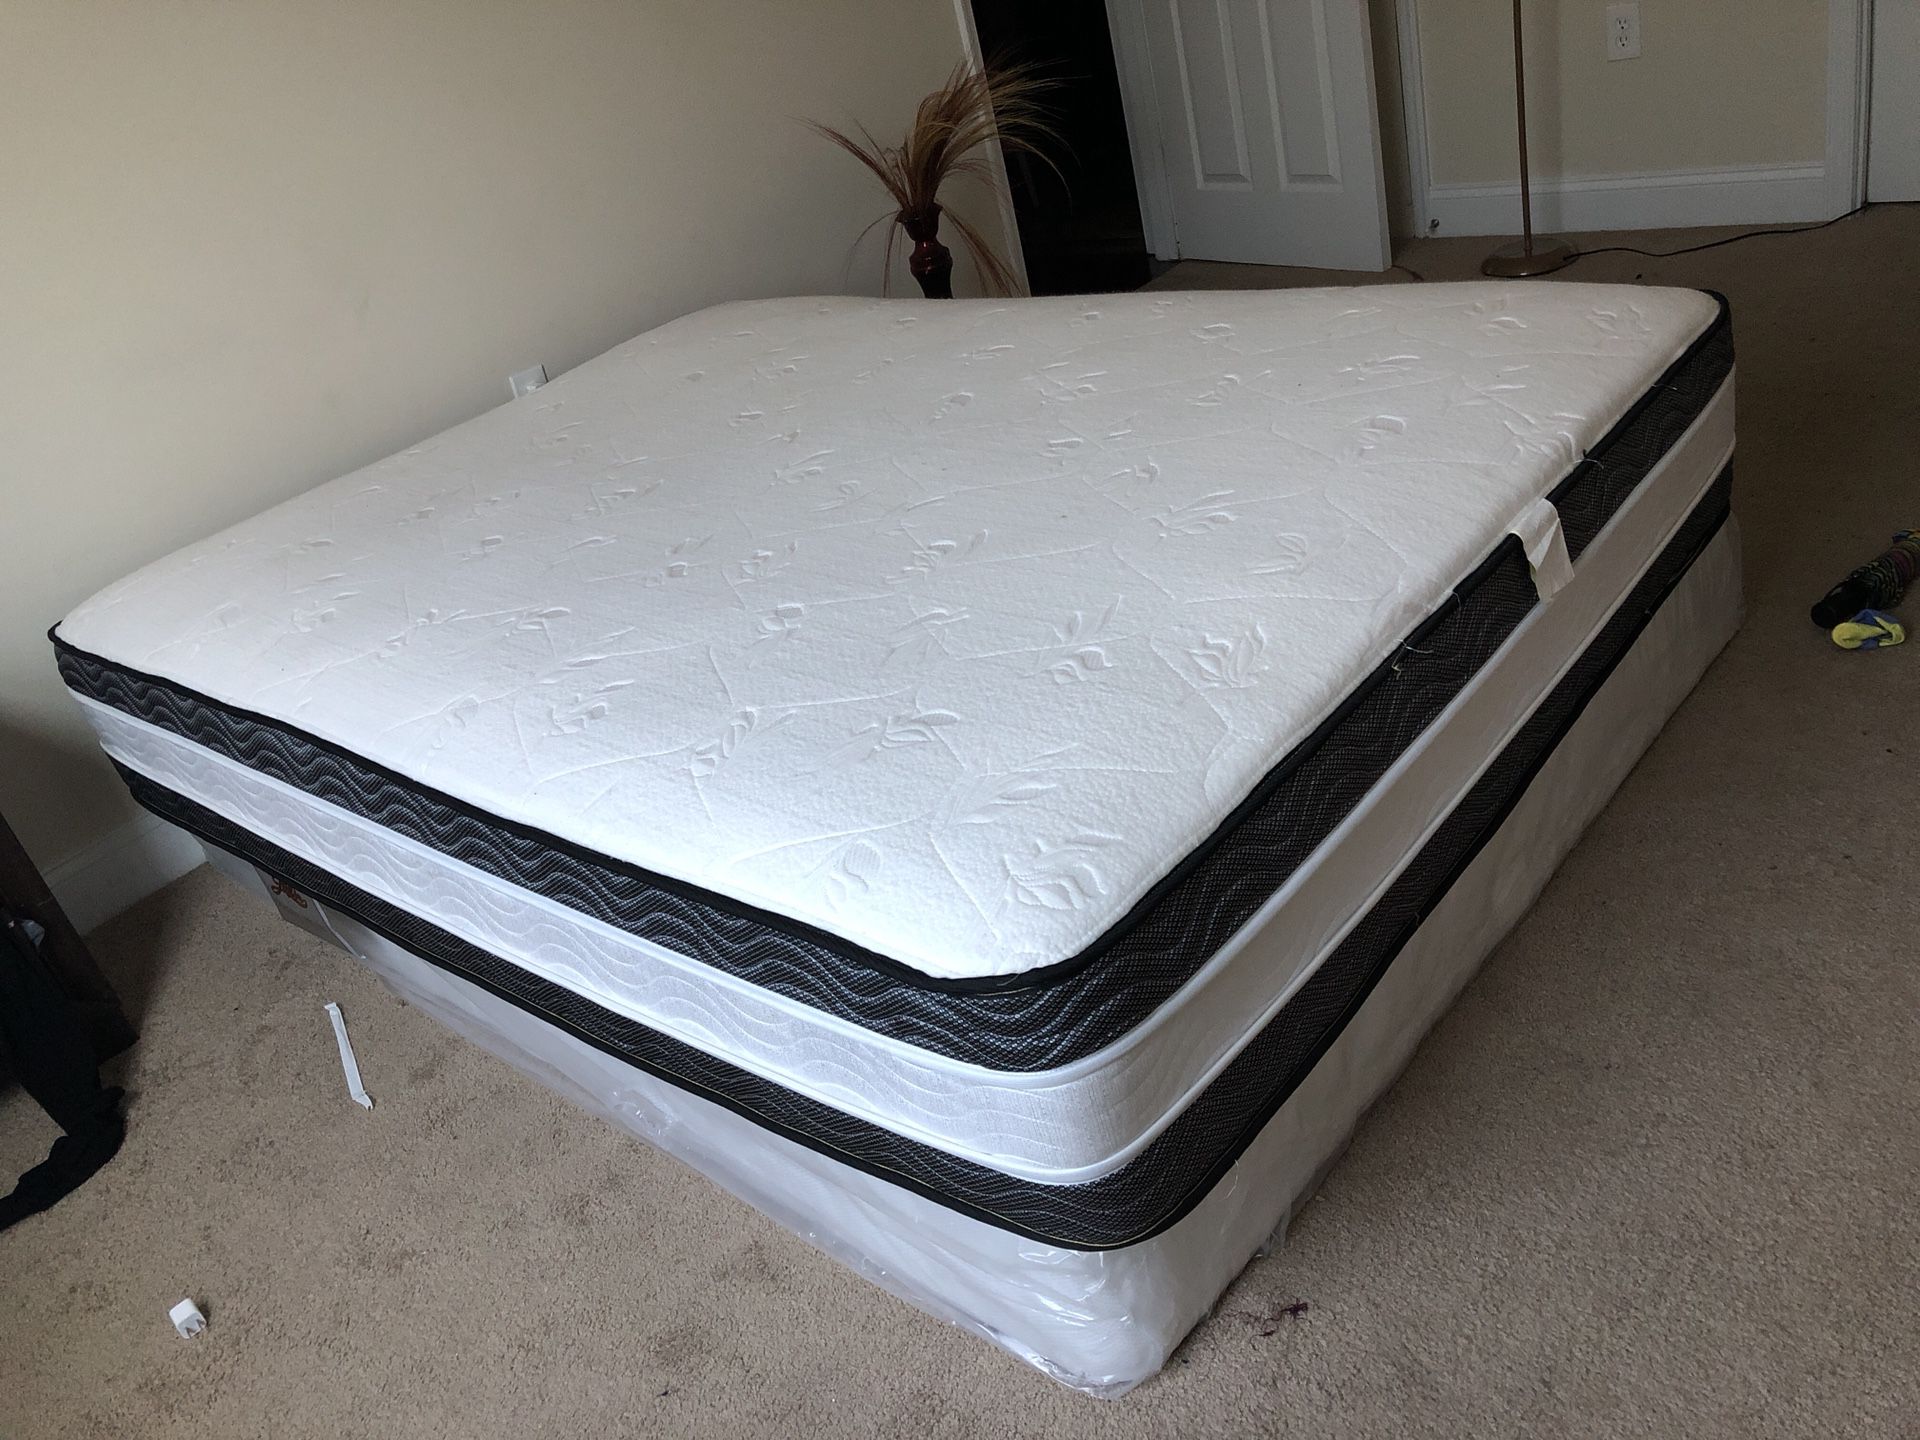 Pillow top on both sides and the box spring still got the plastic on it